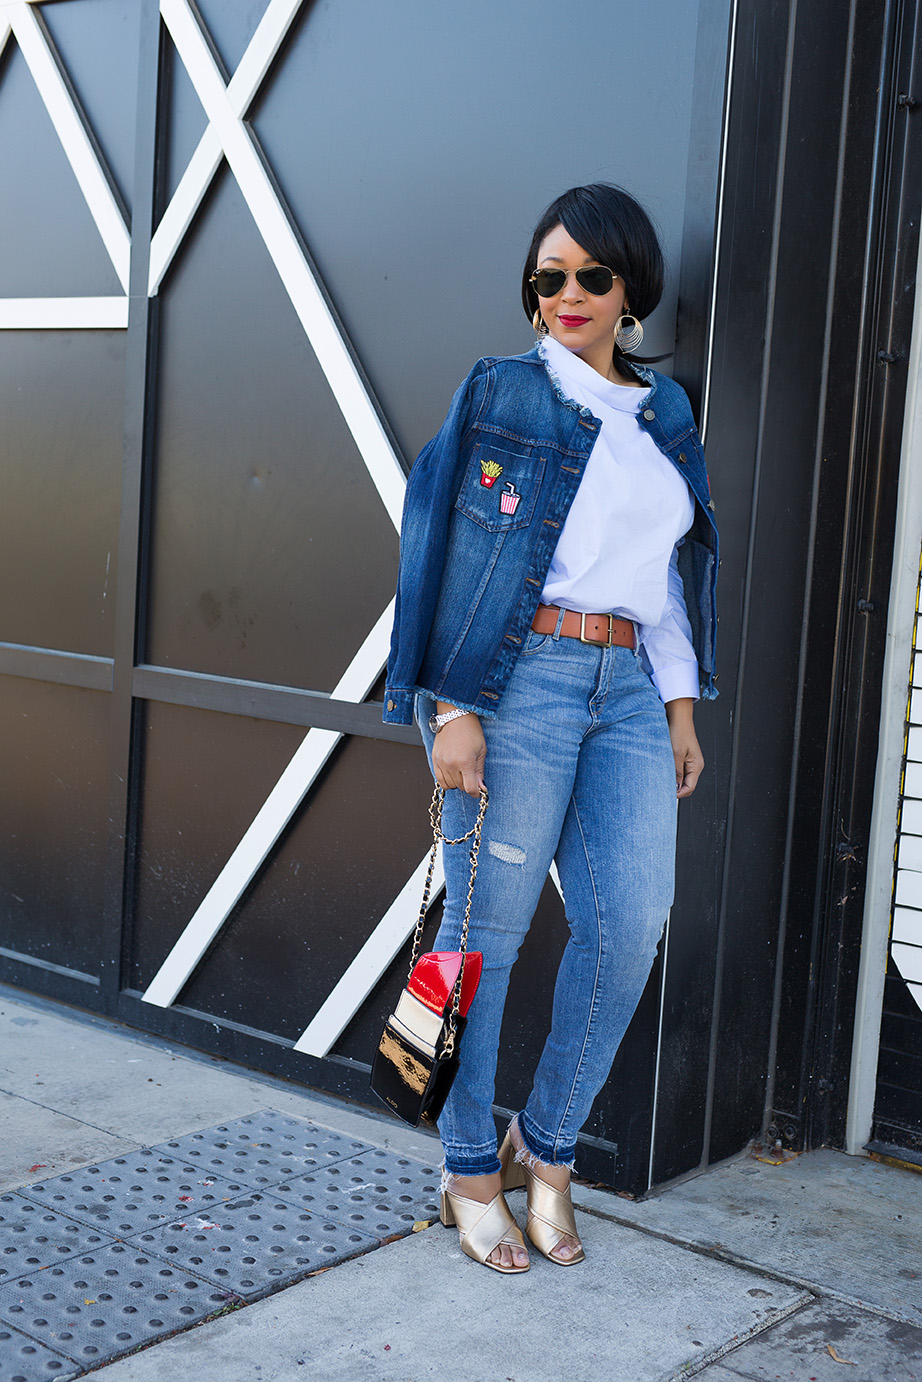 Finding fun this February - What I'm Wearing: charming Charlie Waved Layer Dangle Earrings, Zara Blouse with Asymmetric Neckline, Who What Wear collection Raw Edge Denim Jacket, Mossimo High-rise Skinny Jeans, Topshop Gold Mules Aldo Portland Lipstick bag